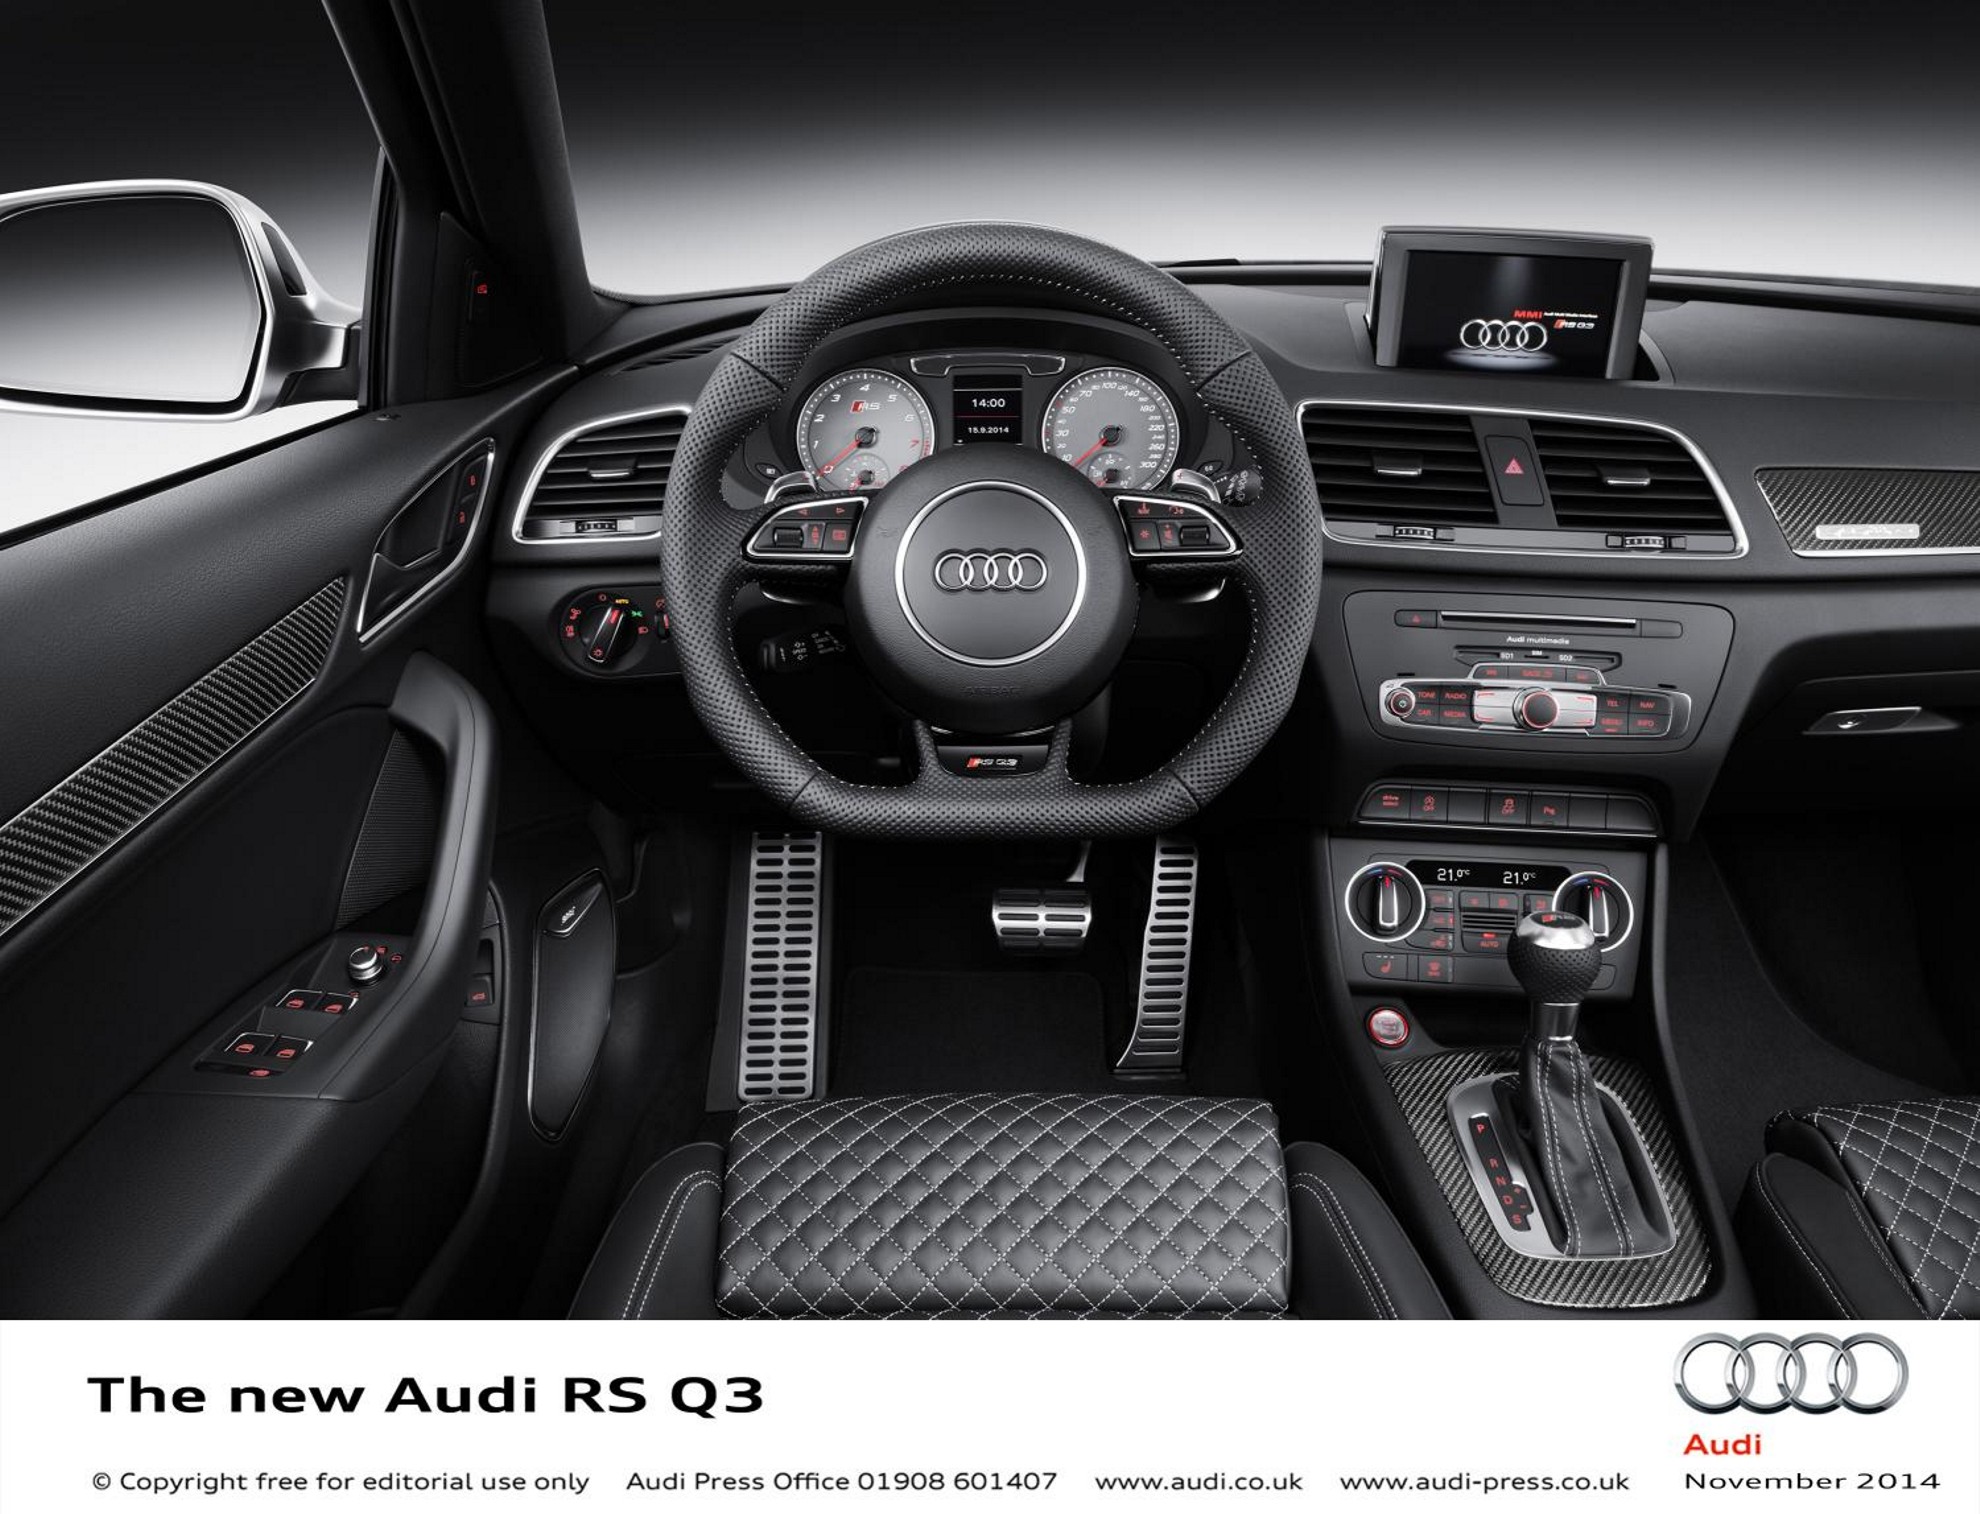 THE NEW AUDI Q3 AND RS Q3 – EVEN BETTER DRESSED FOR SUCCESS